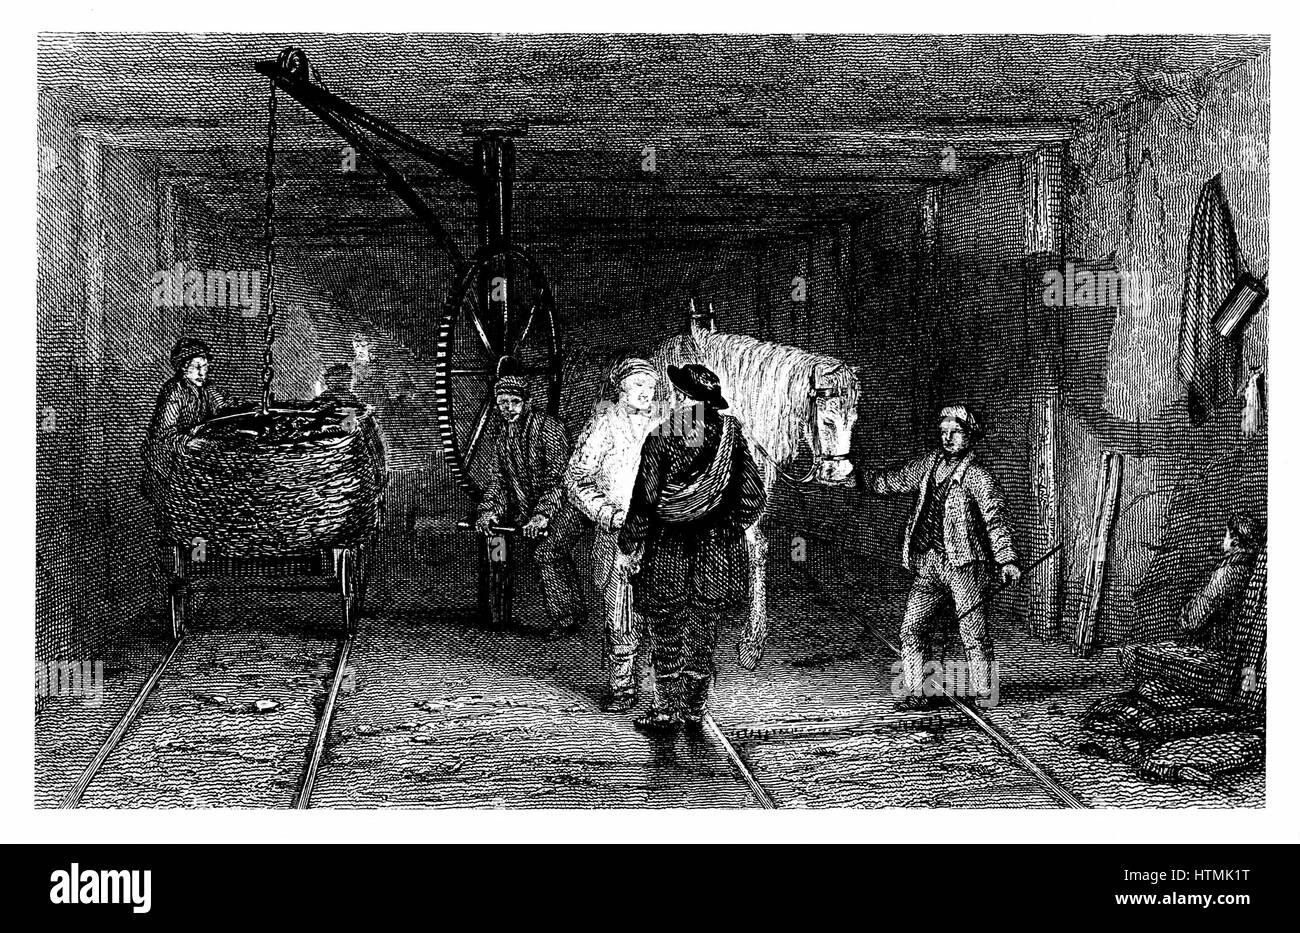 Coal Mining: Underground scene showing full baskets (corves) of coal being loaded on a tram wagon using a crane. Pit ponies used to haul coal underground. From W Fordyce 'A History of Coal, Coke, Coal Fields….' London 1860. Engraving Stock Photo